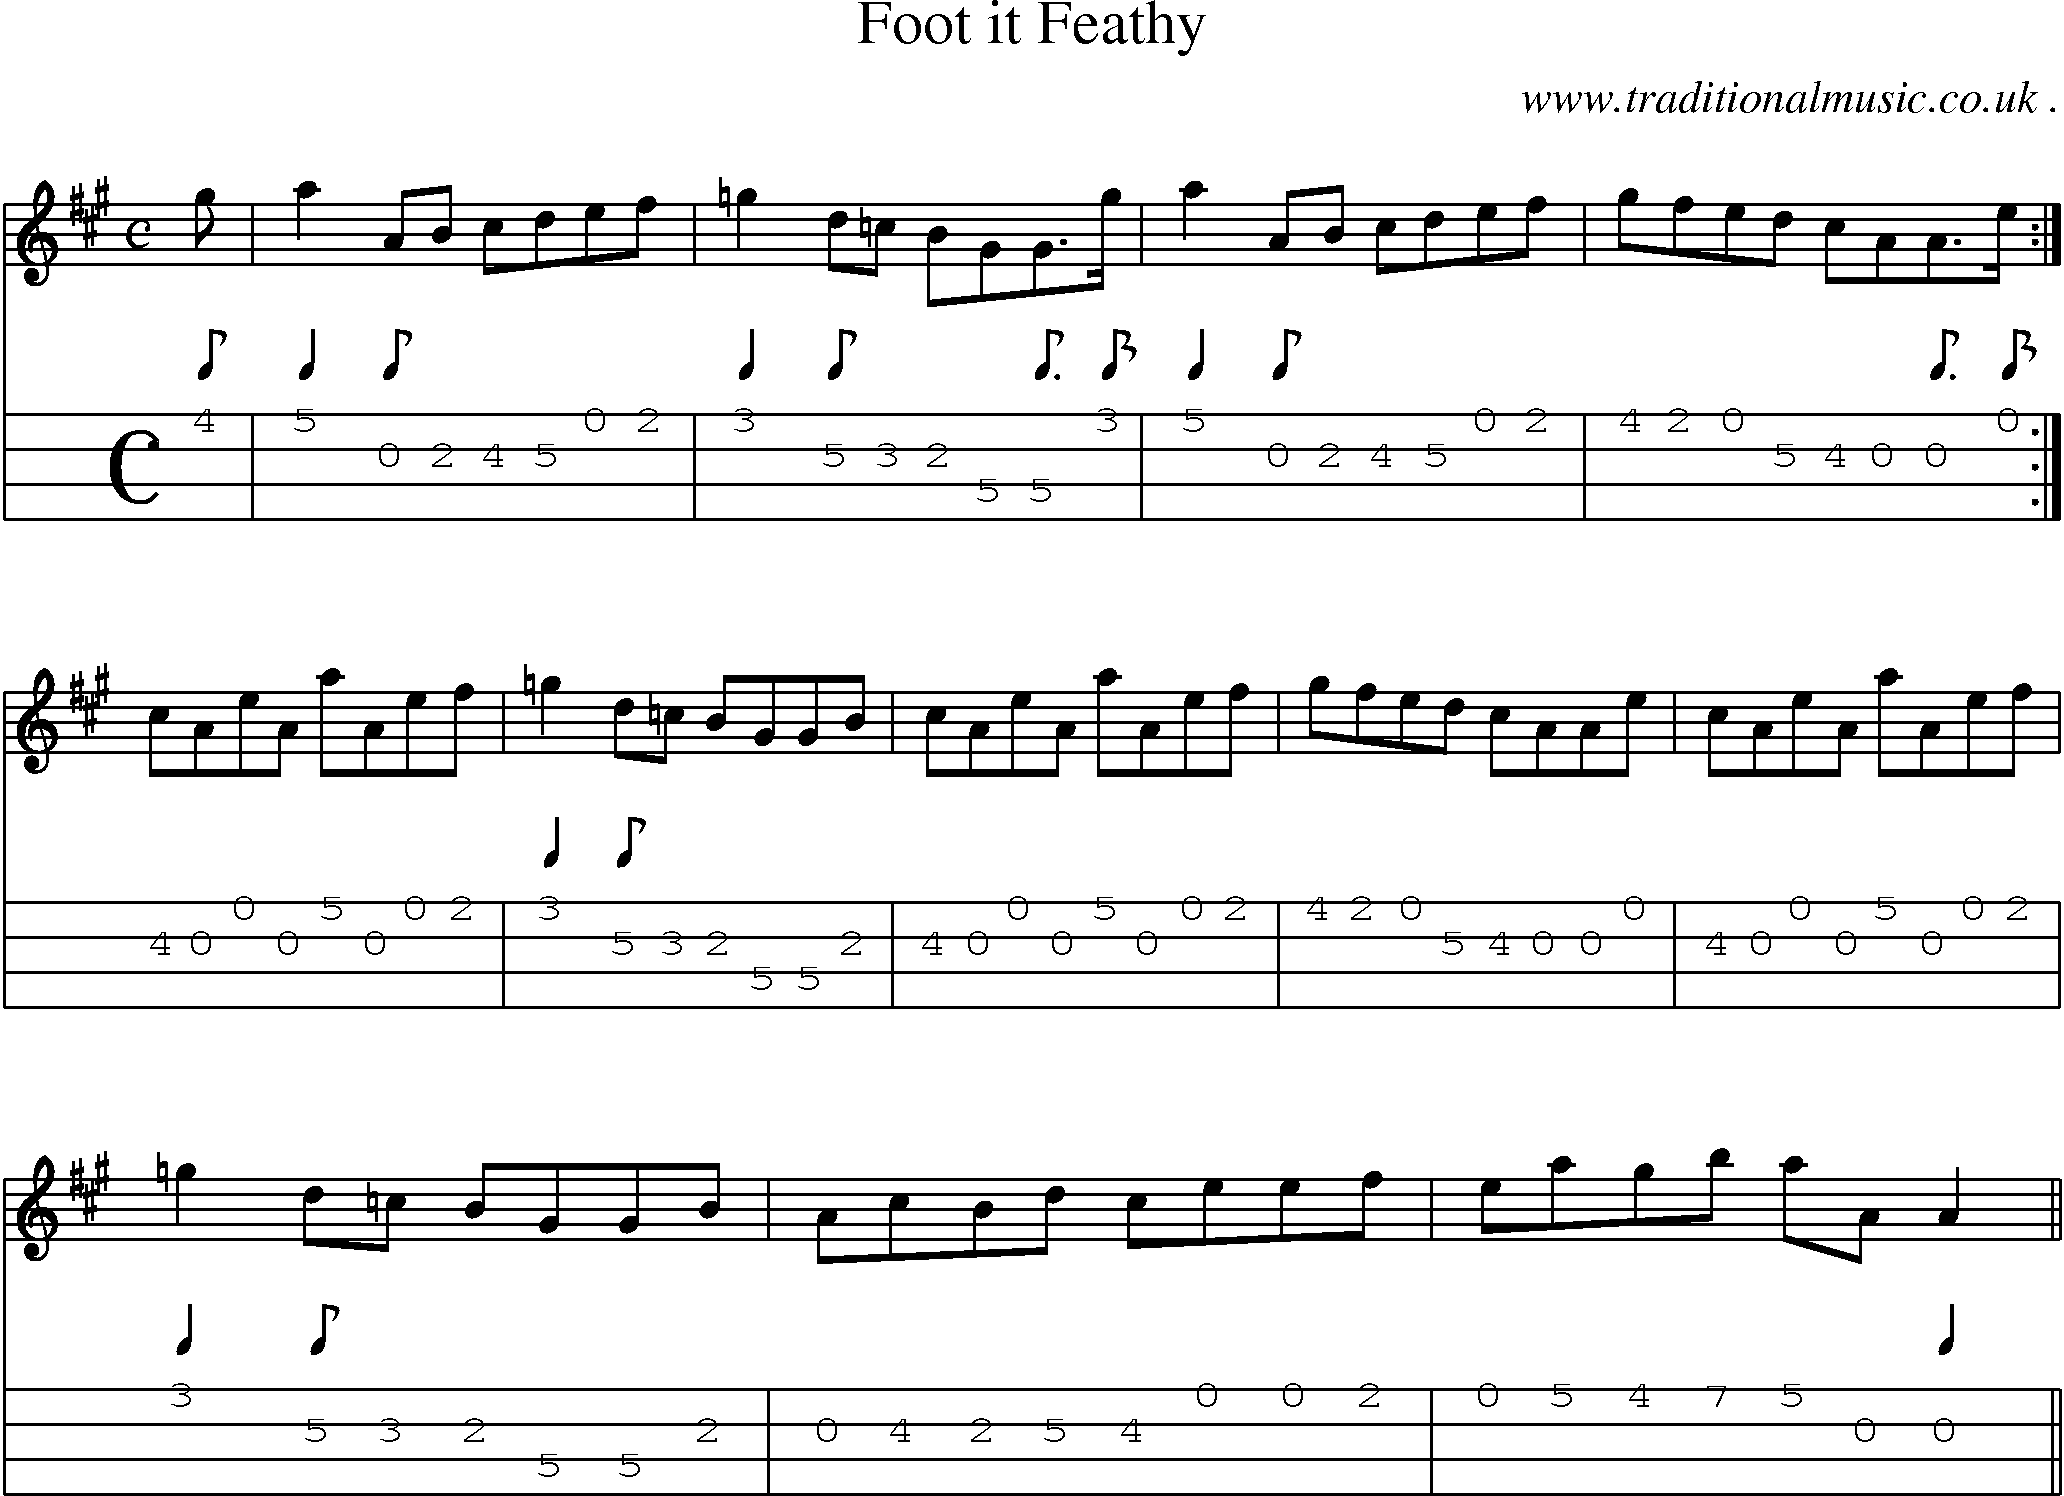 Sheet-music  score, Chords and Mandolin Tabs for Foot It Feathy